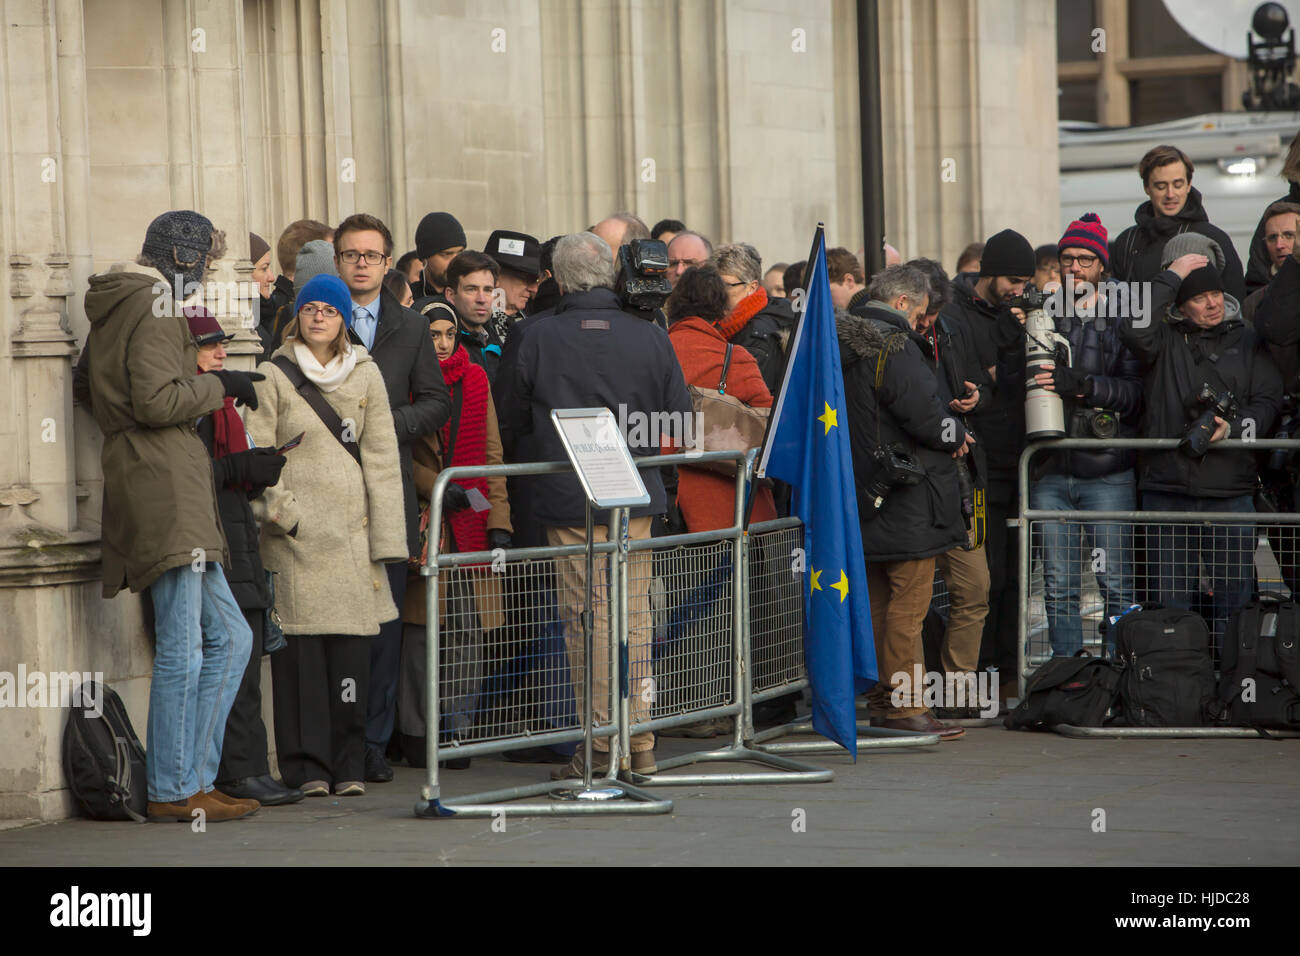 London, UK. 24th Jan, 2017. Verdict of the Supreme Court. The verdict of the Supreme Court was given today. The public queued to gain entrance to the court Credit: Jane Campbell/Alamy Live News Stock Photo